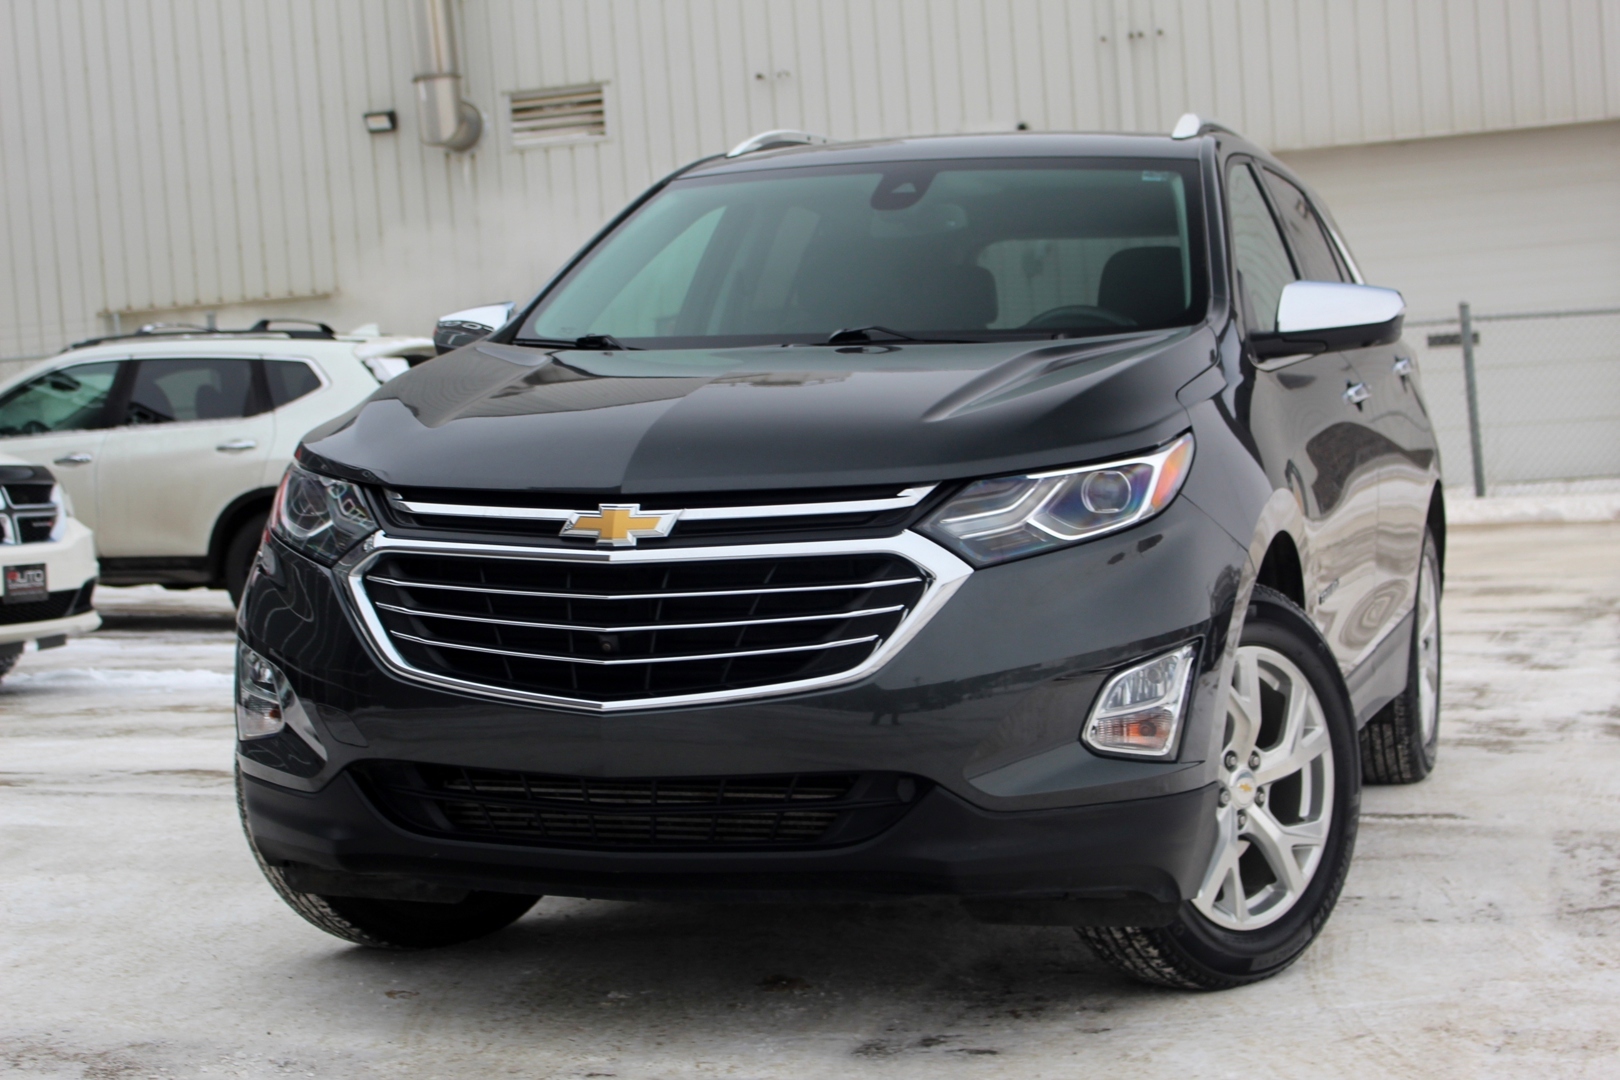 2019 Chevrolet Equinox Premier - AWD - LEATHER COOLED SEATS - LOW KMS